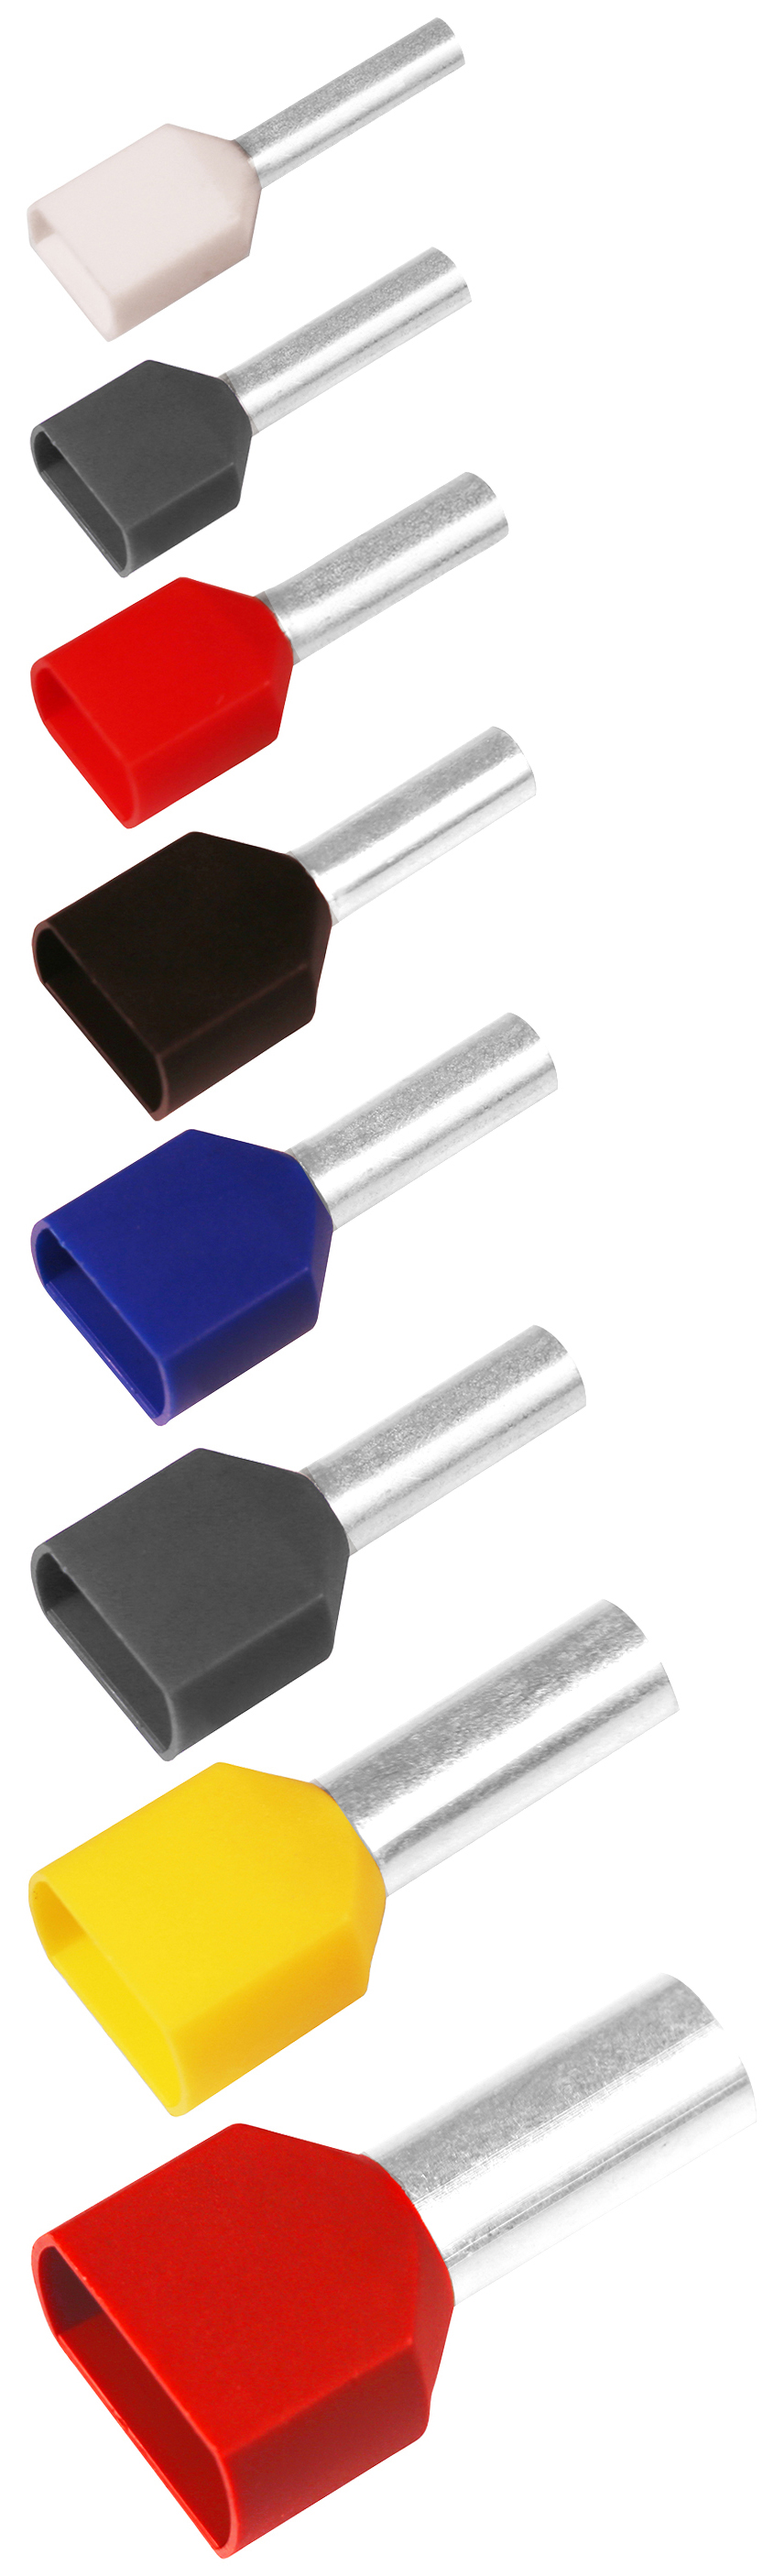 Pre-insulated TWIN-end terminals 2 x 0.5 - 2 x 10 mm², ET2, standard colour code